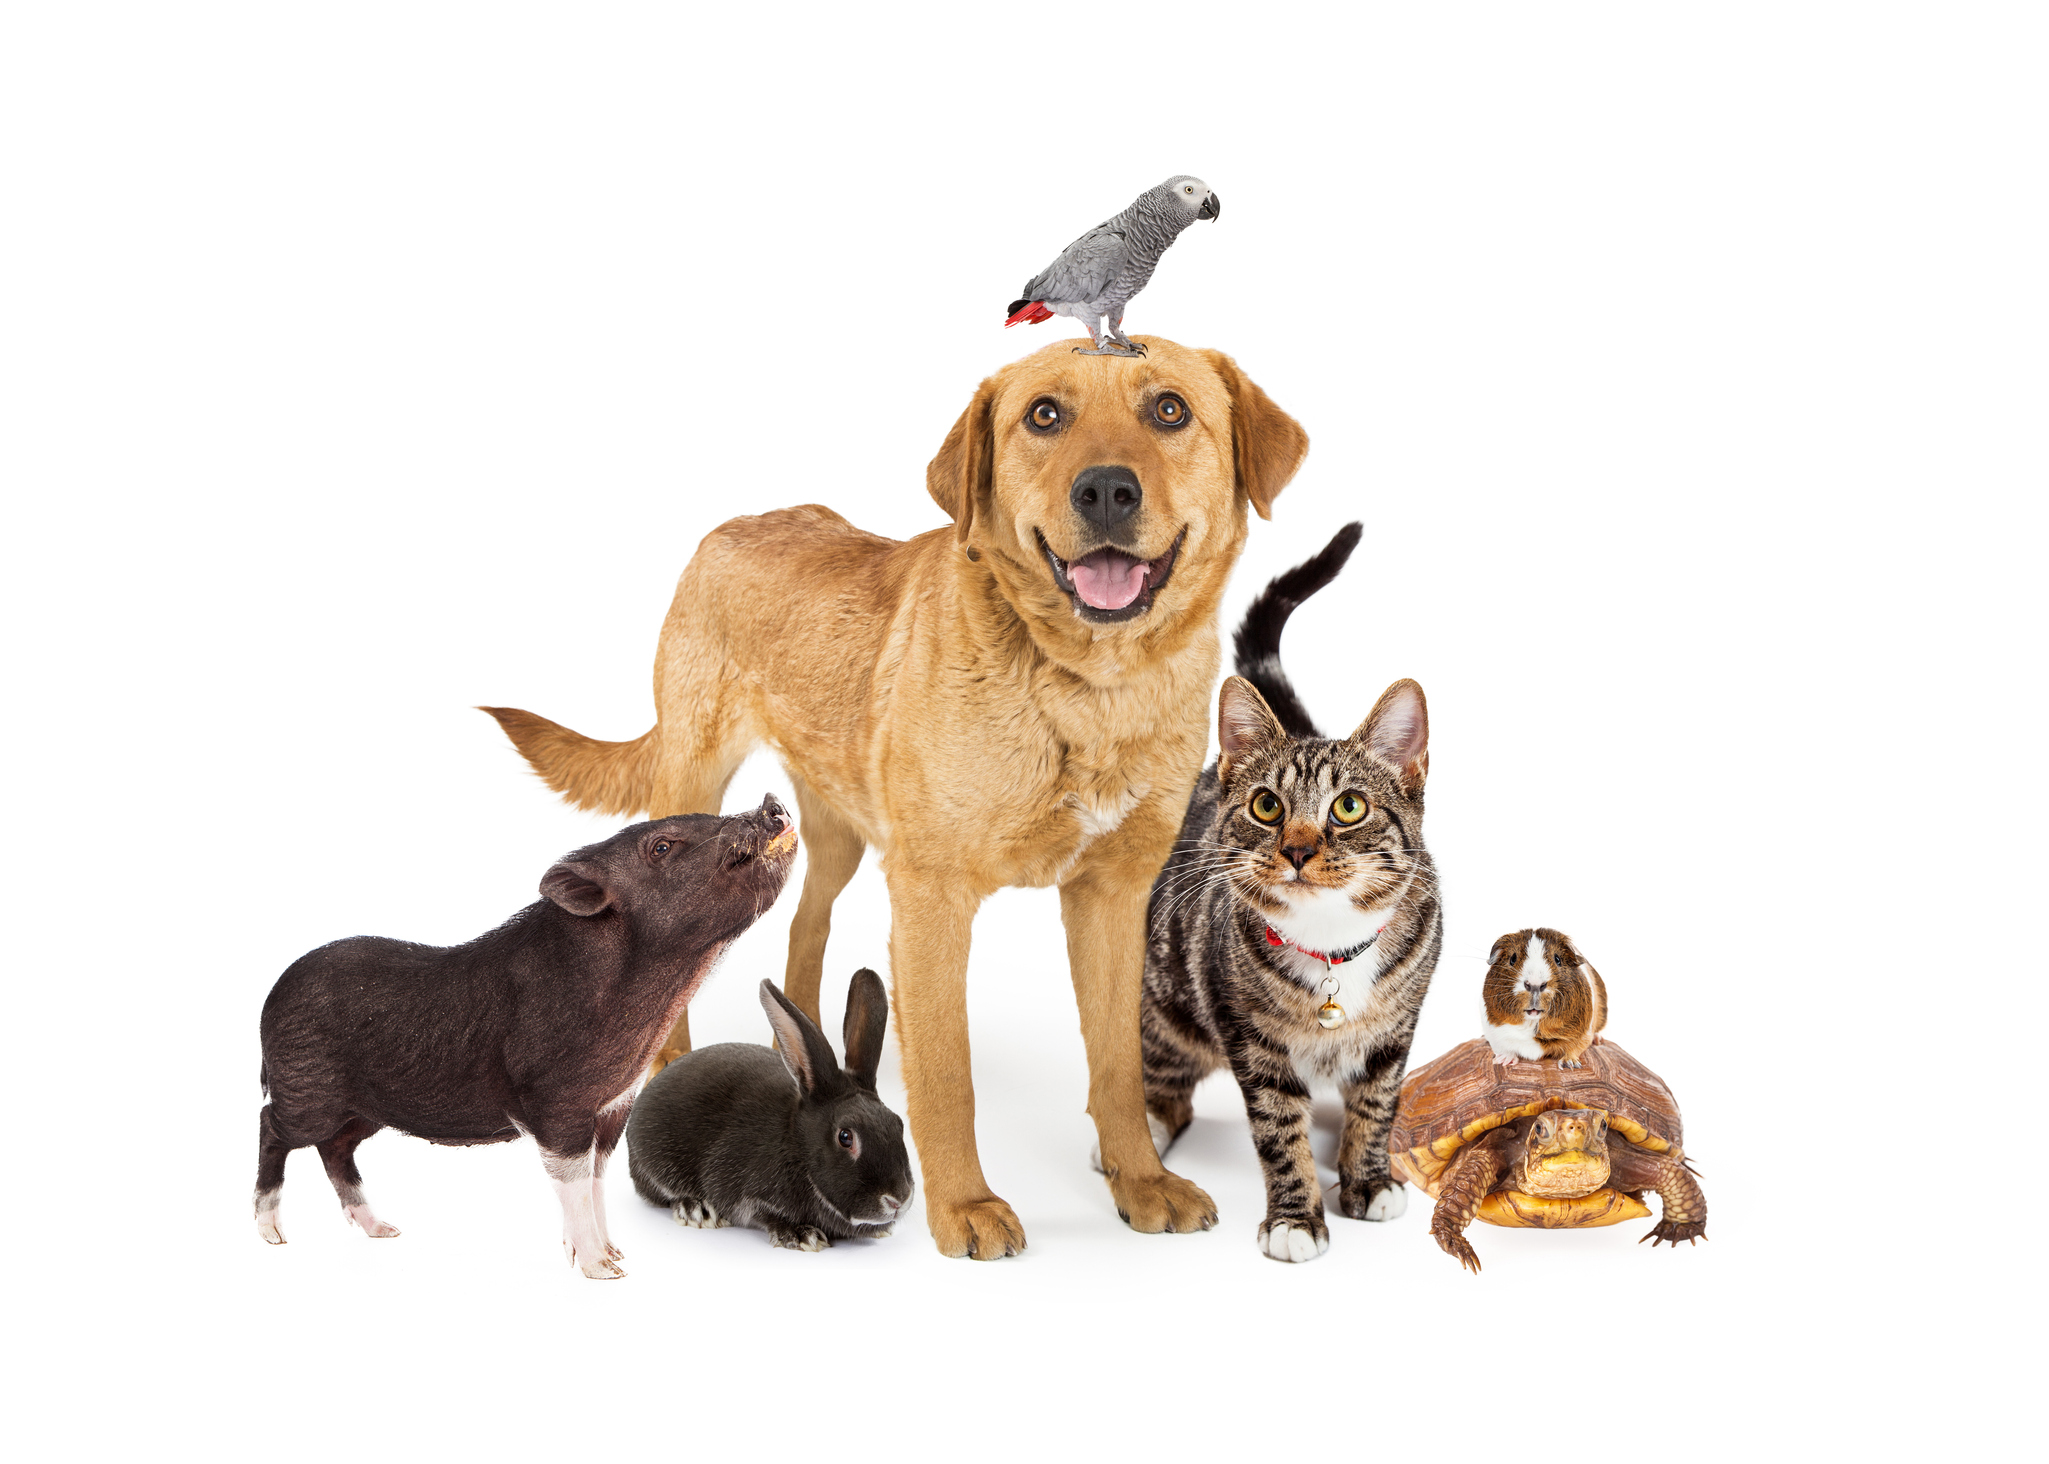 Pets as Life Insurance Beneficiaries